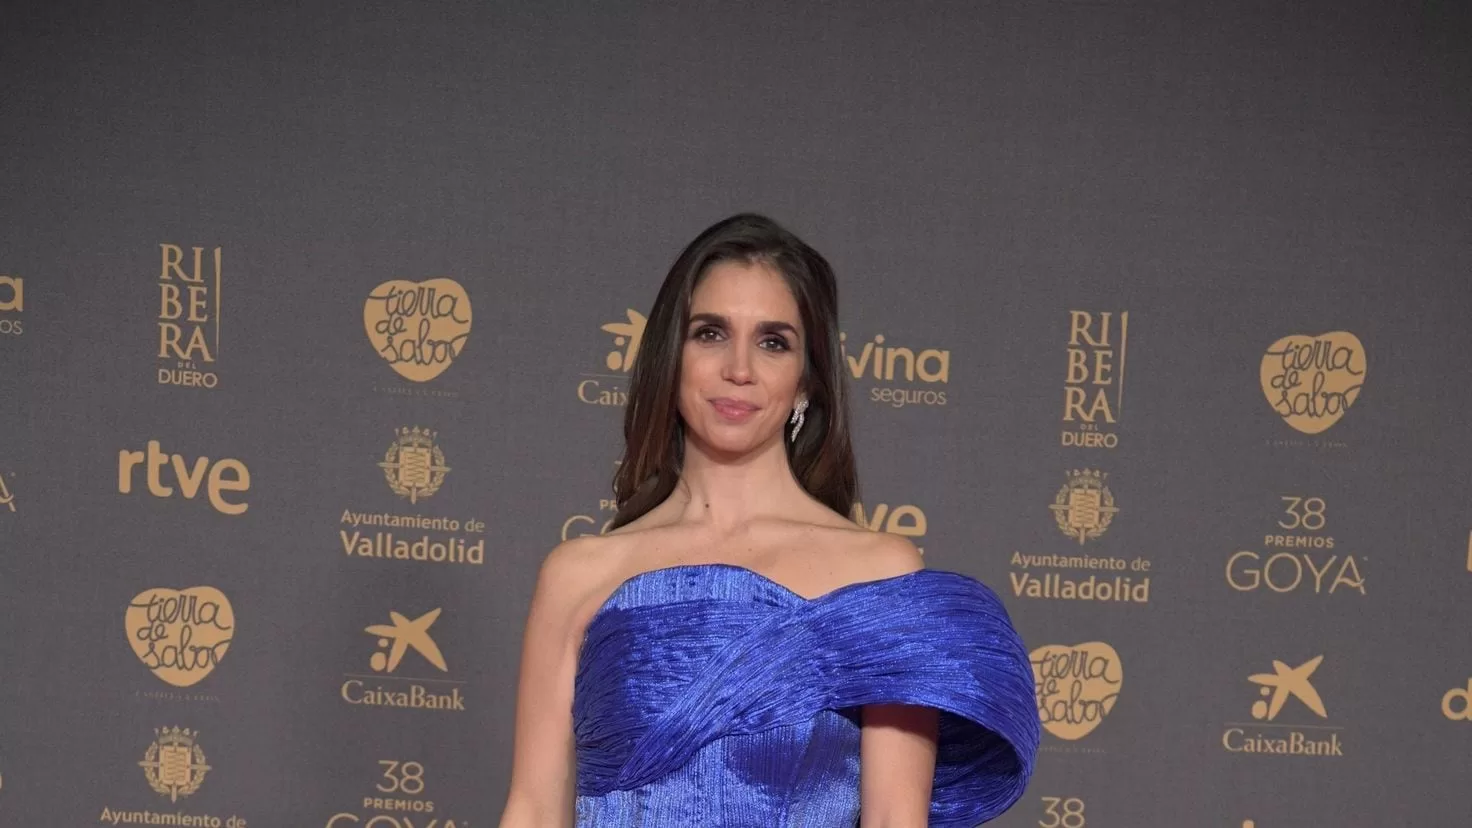 Elena Furiase explodes after her time on the Goya red carpet: Insults hurt
